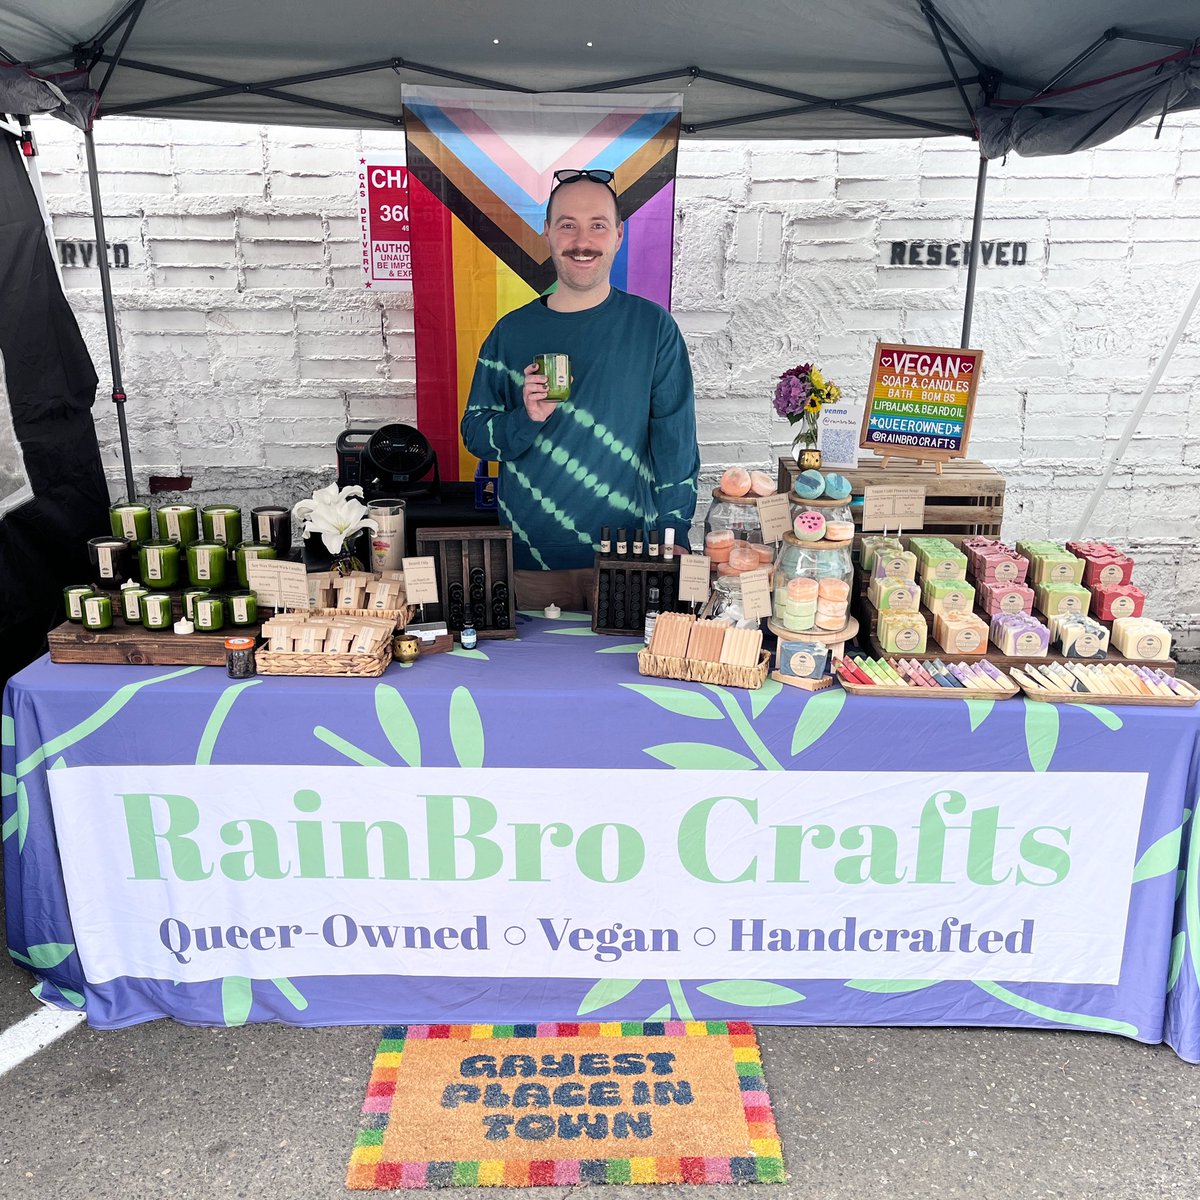 We’re downtown at Kindred Homestead Supply today from 9 to 4 with some amazing soap, candles, and lots more! #kindredhomestead #rainbro #rainbrocrafts #downtownvancouver #vancouver #washington #saturdaymarket #shopsmall #shoplocal #lowwaste #queerownedbusiness